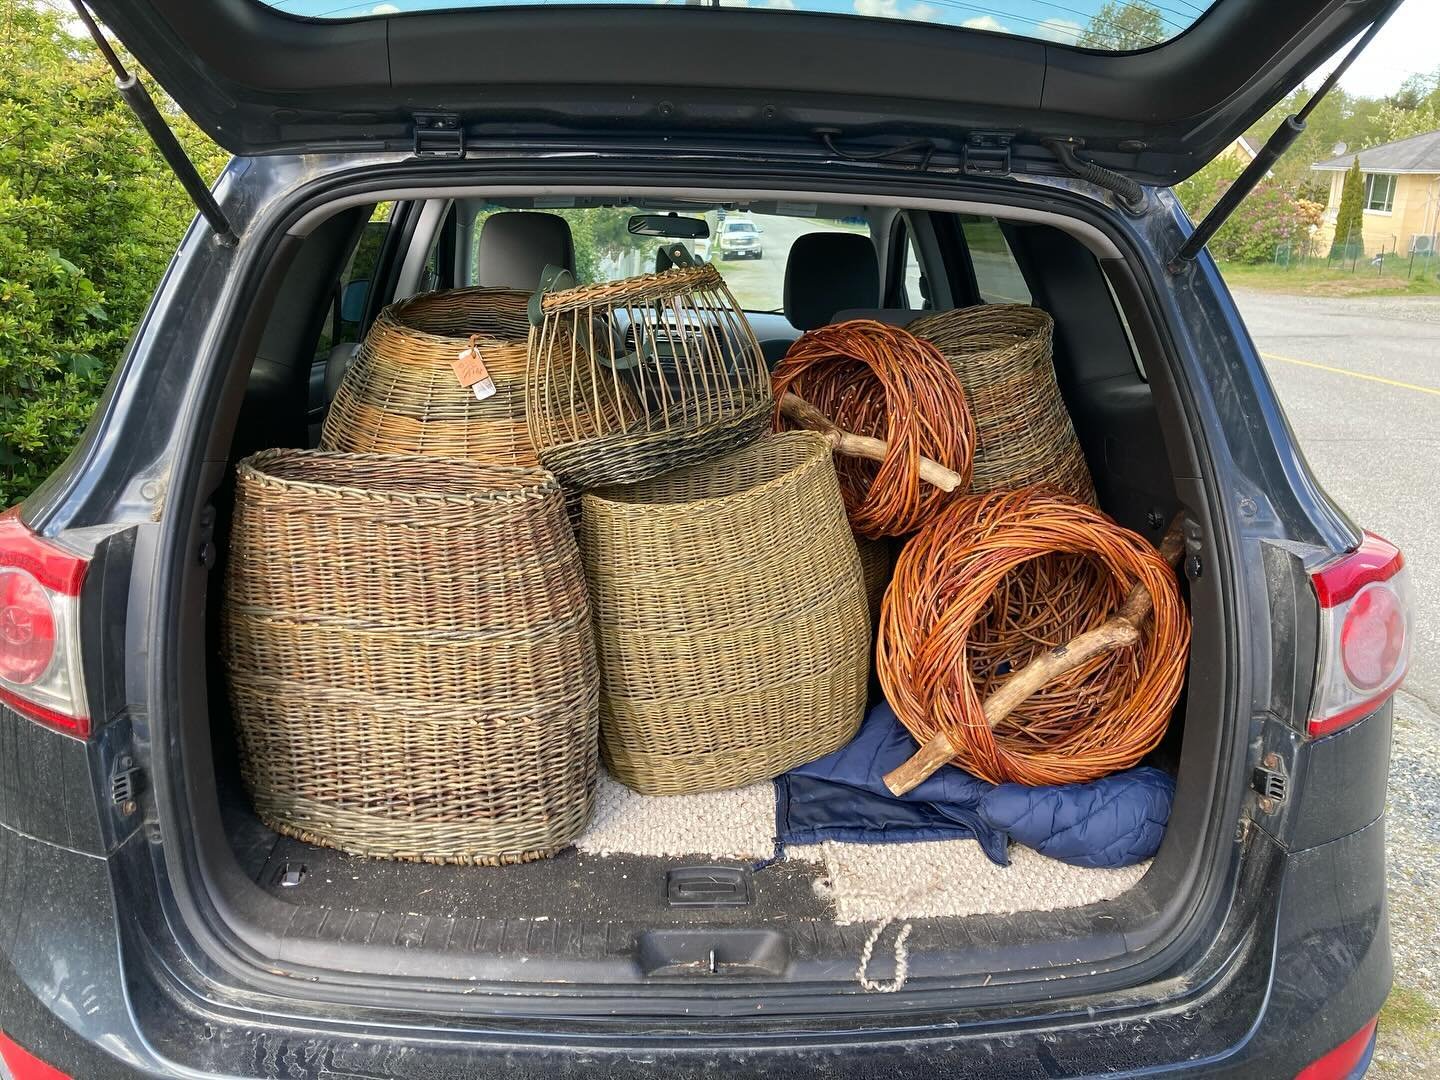 Delivering baskets (there are many more in there that you can&rsquo;t see!) to @tidalartcentre for the exhibit😁🧺 #justletmeweave #basketmaker #willow #willowbaskets #craftswoman #tidalartcentre